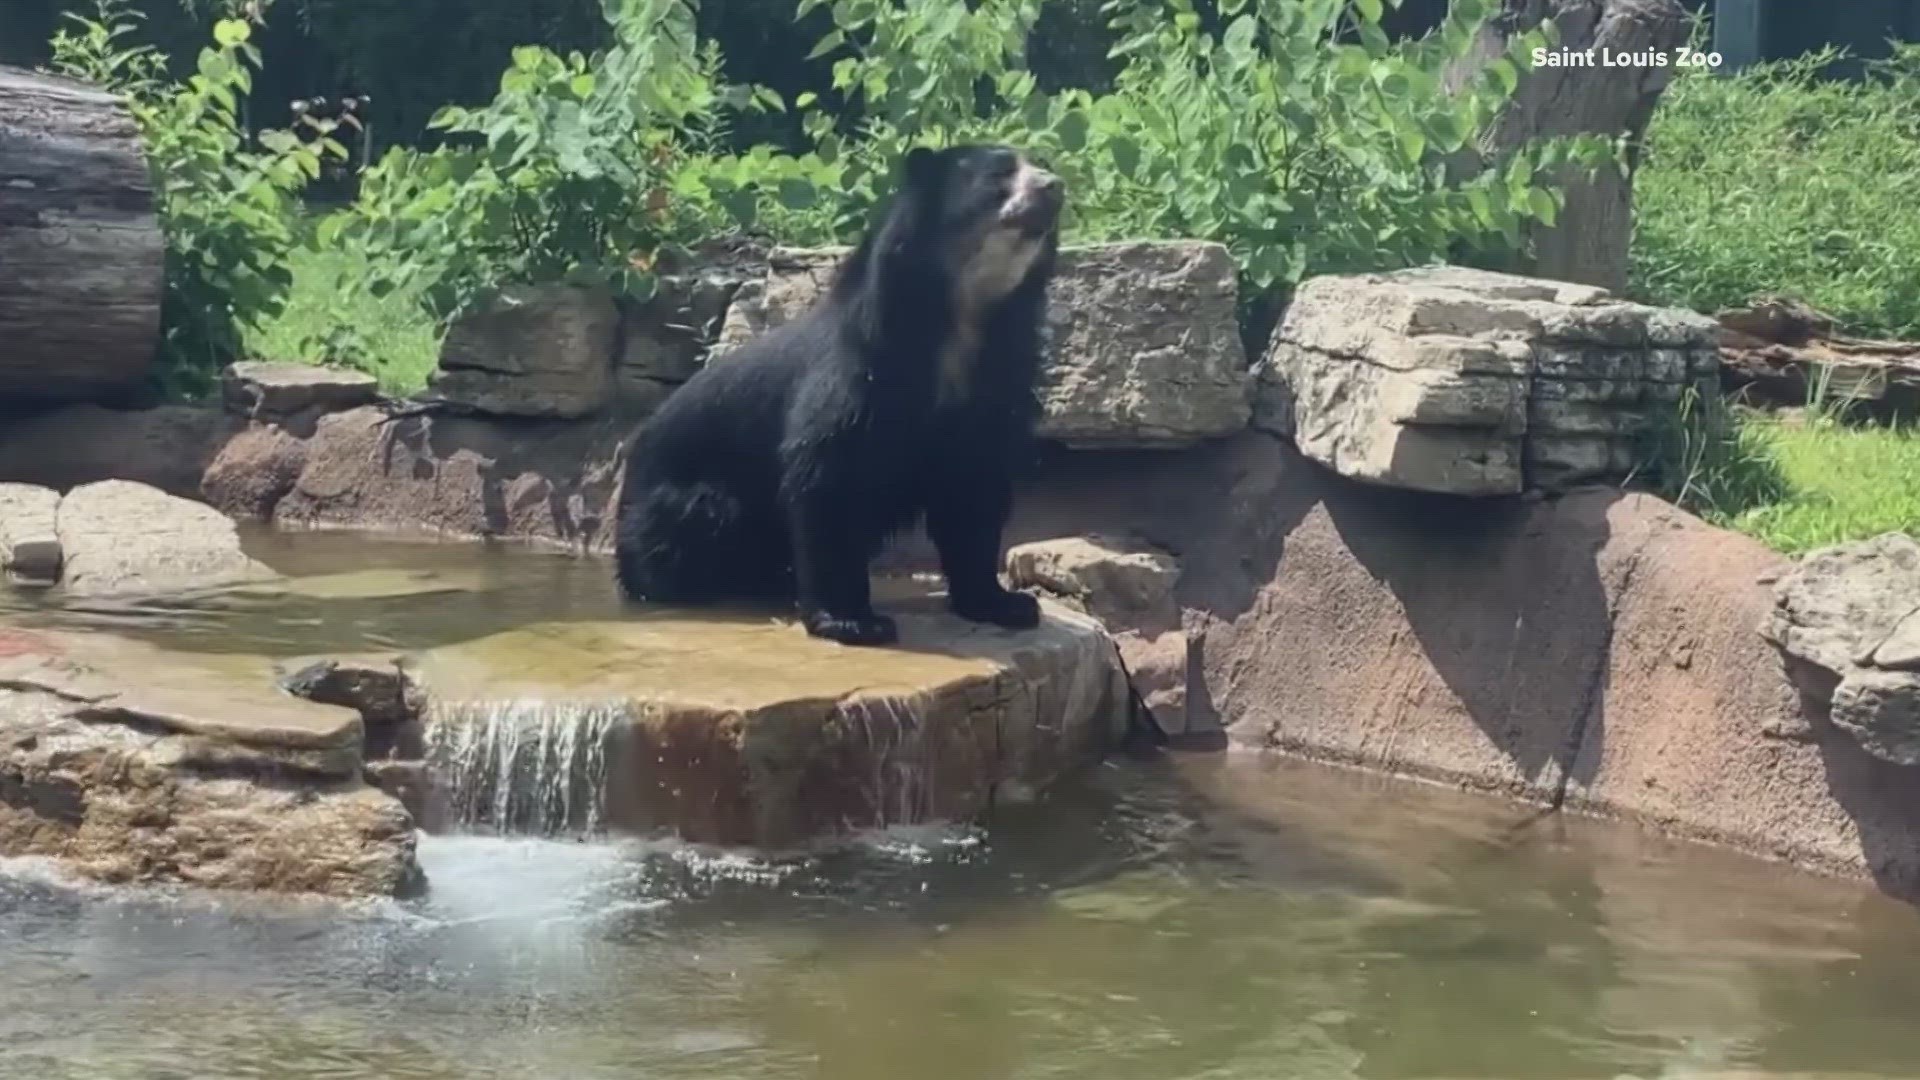 Ben the Andean bear escaped his St. Louis enclosure twice. Now, he's moving to the Gladys Porter Zoo in Texas.